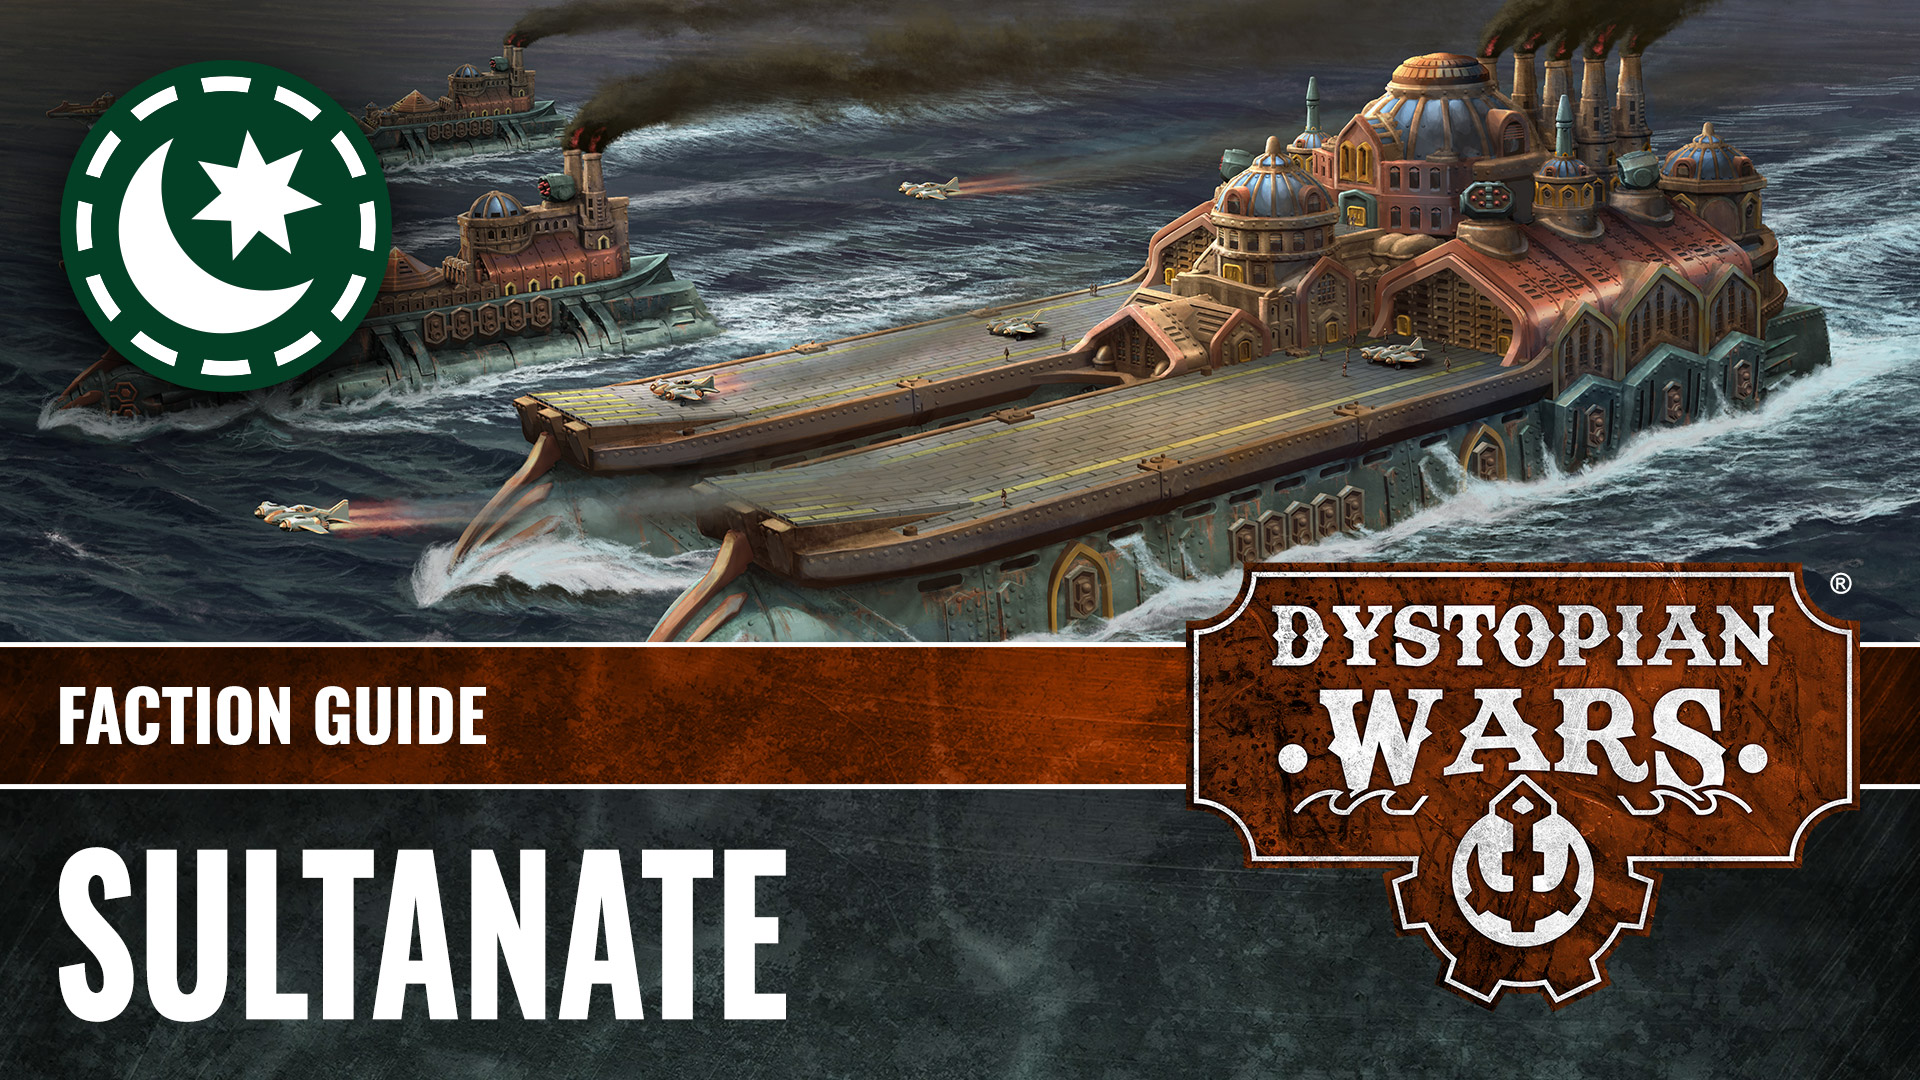 SULTANATE-Lore-Of-Dystopian-Wars-Faction-Guide